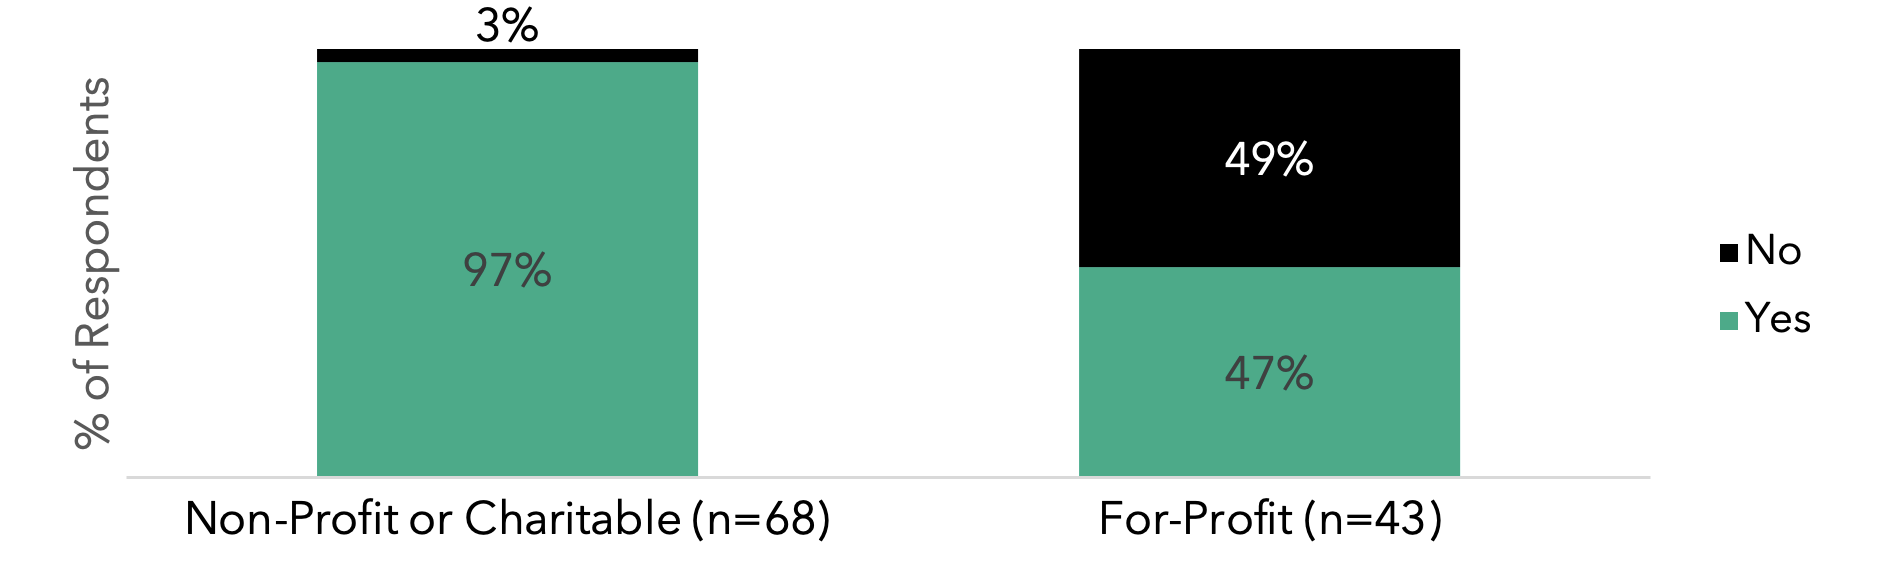 % of respondents 97% Non-Profit or Charitable (n=68) | 47% For-Profit (n=43)